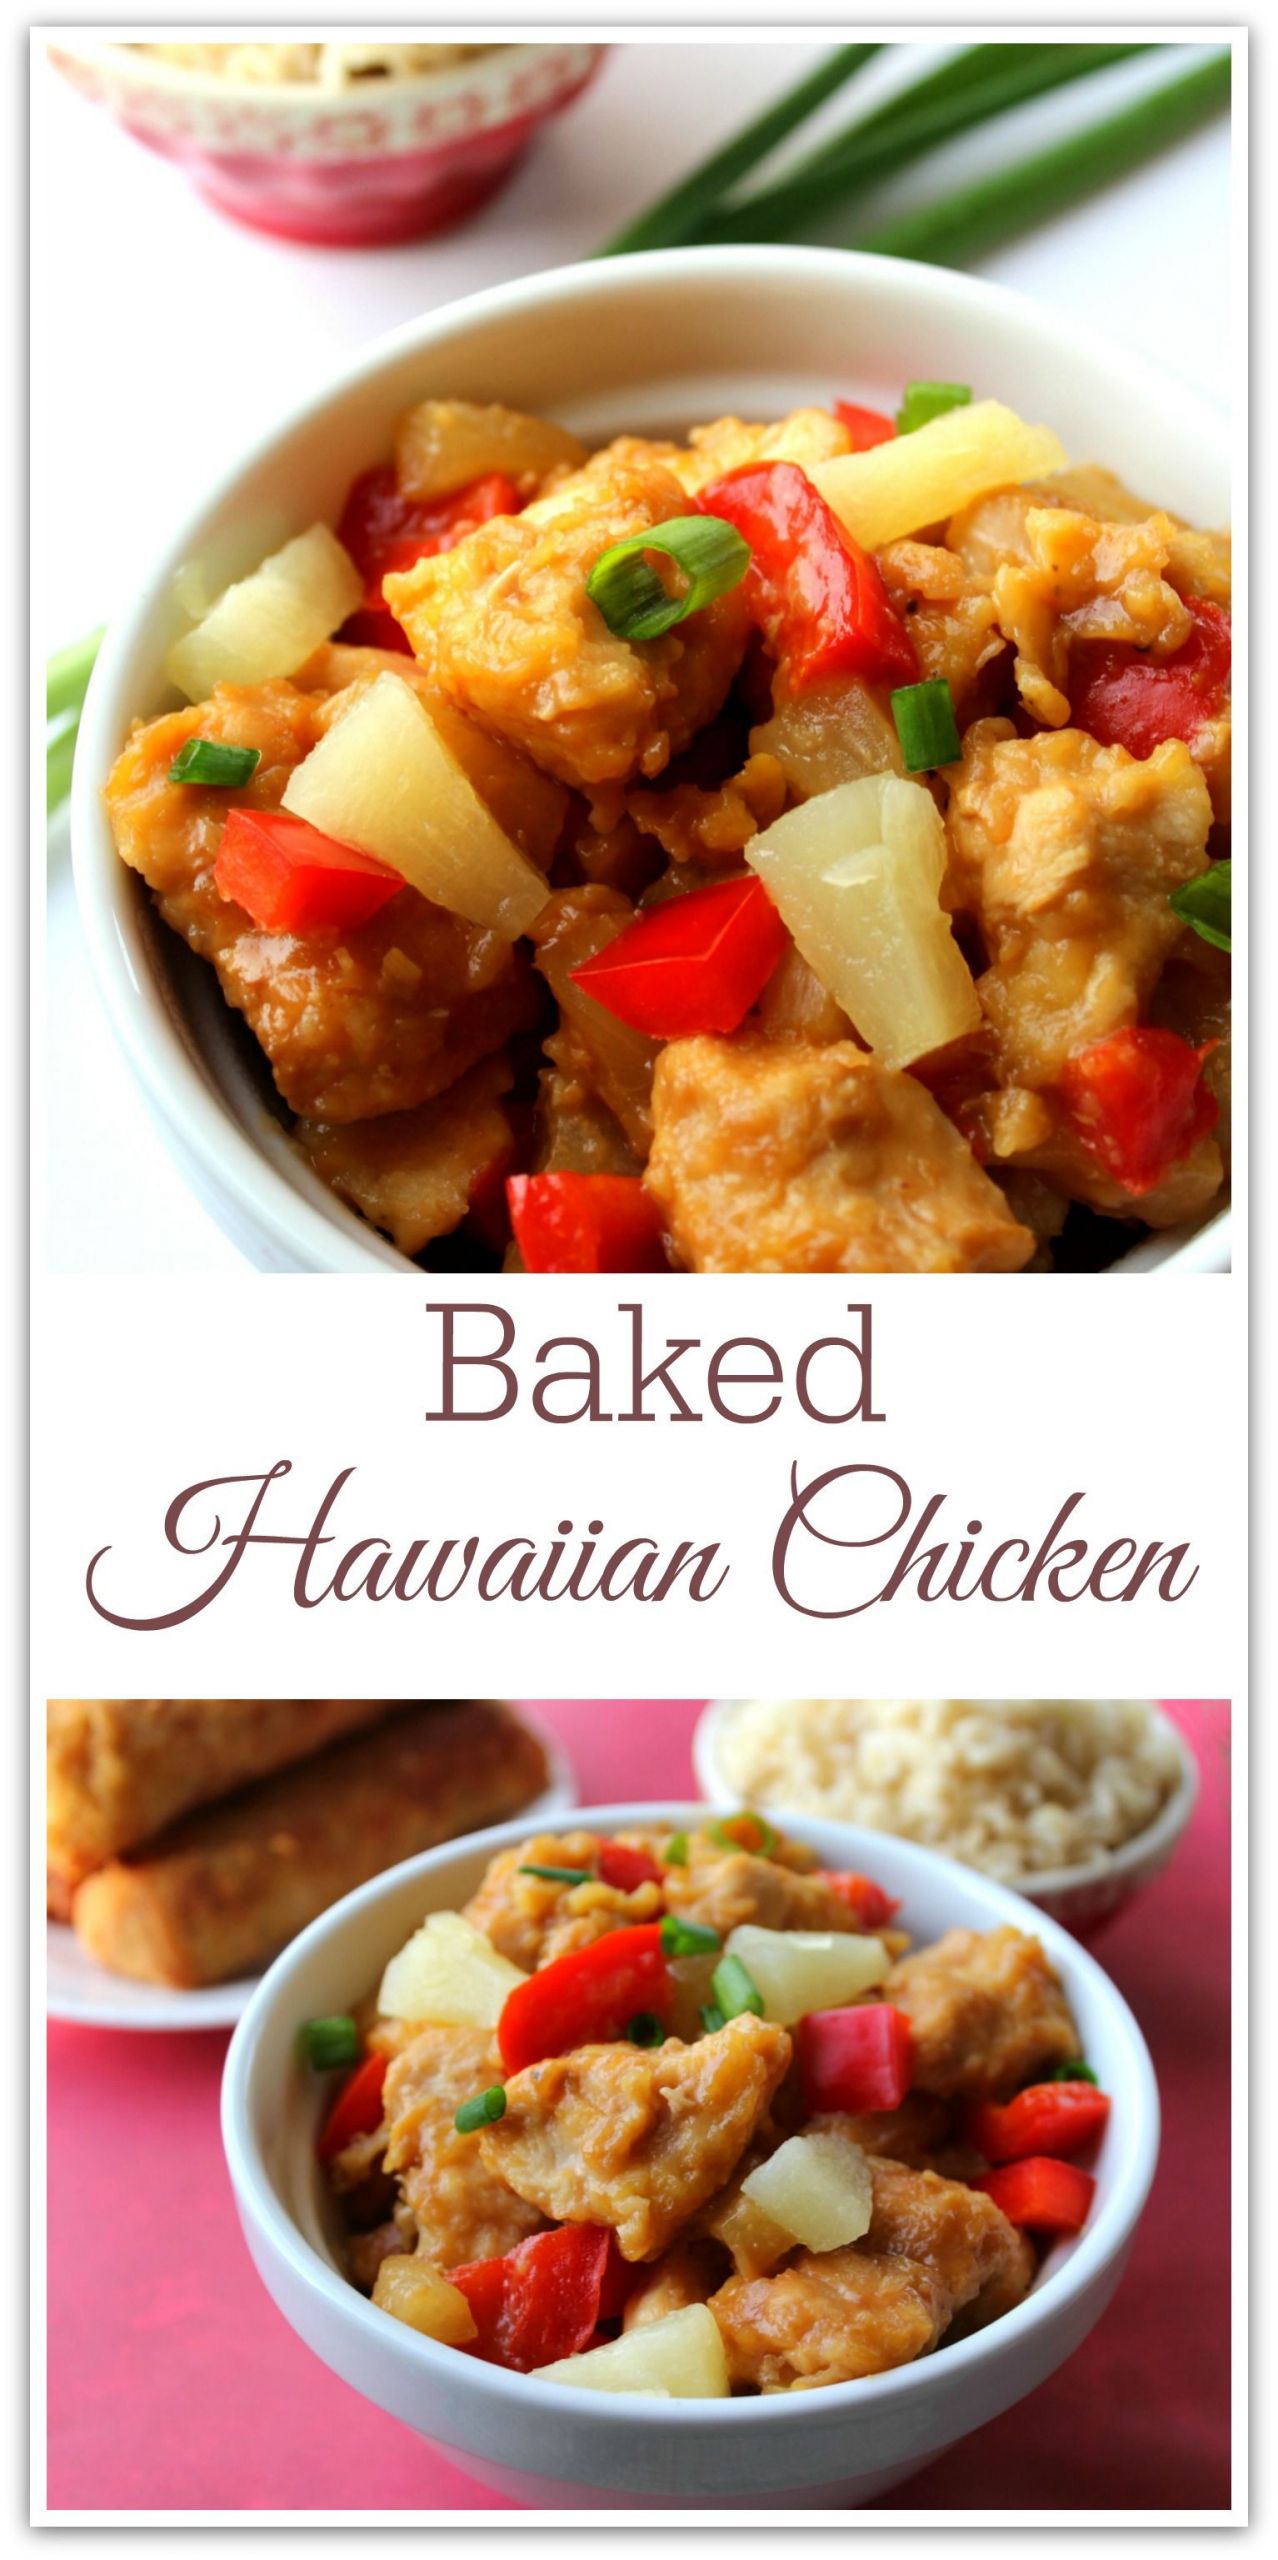 Chicken Recipes Kids Love
 This Baked Sweet Hawaiian Chicken recipe is so easy and